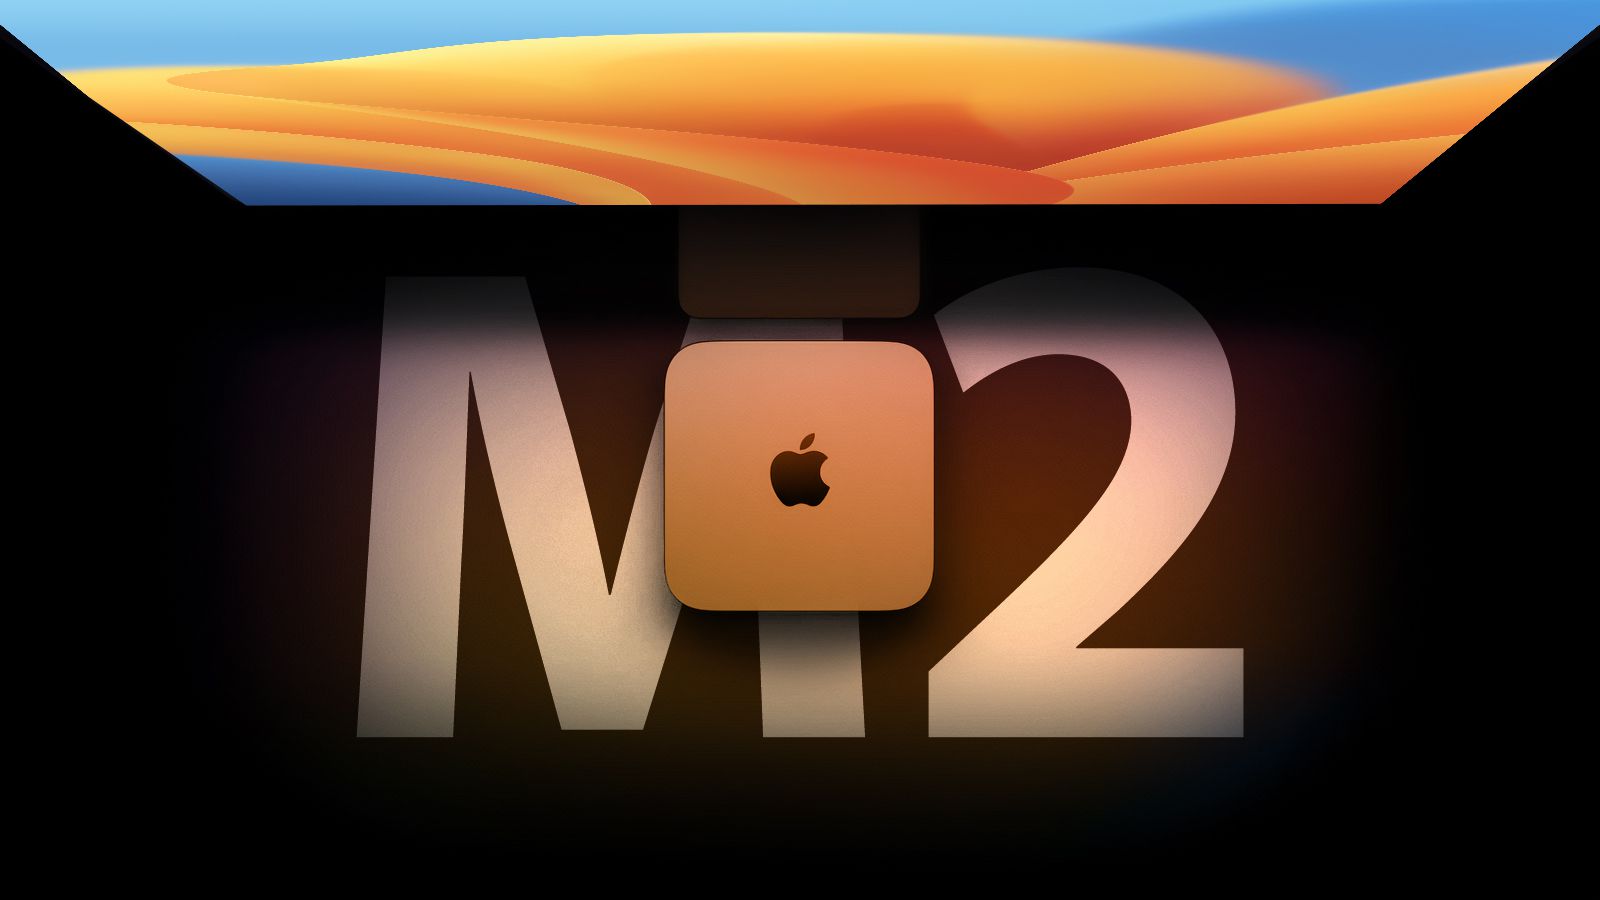 Gurman: Apple Planning M2 Professional Mac Mini, New Apple TV With A14 Chip, Revamped HomePod With S8 Chip, and Extra